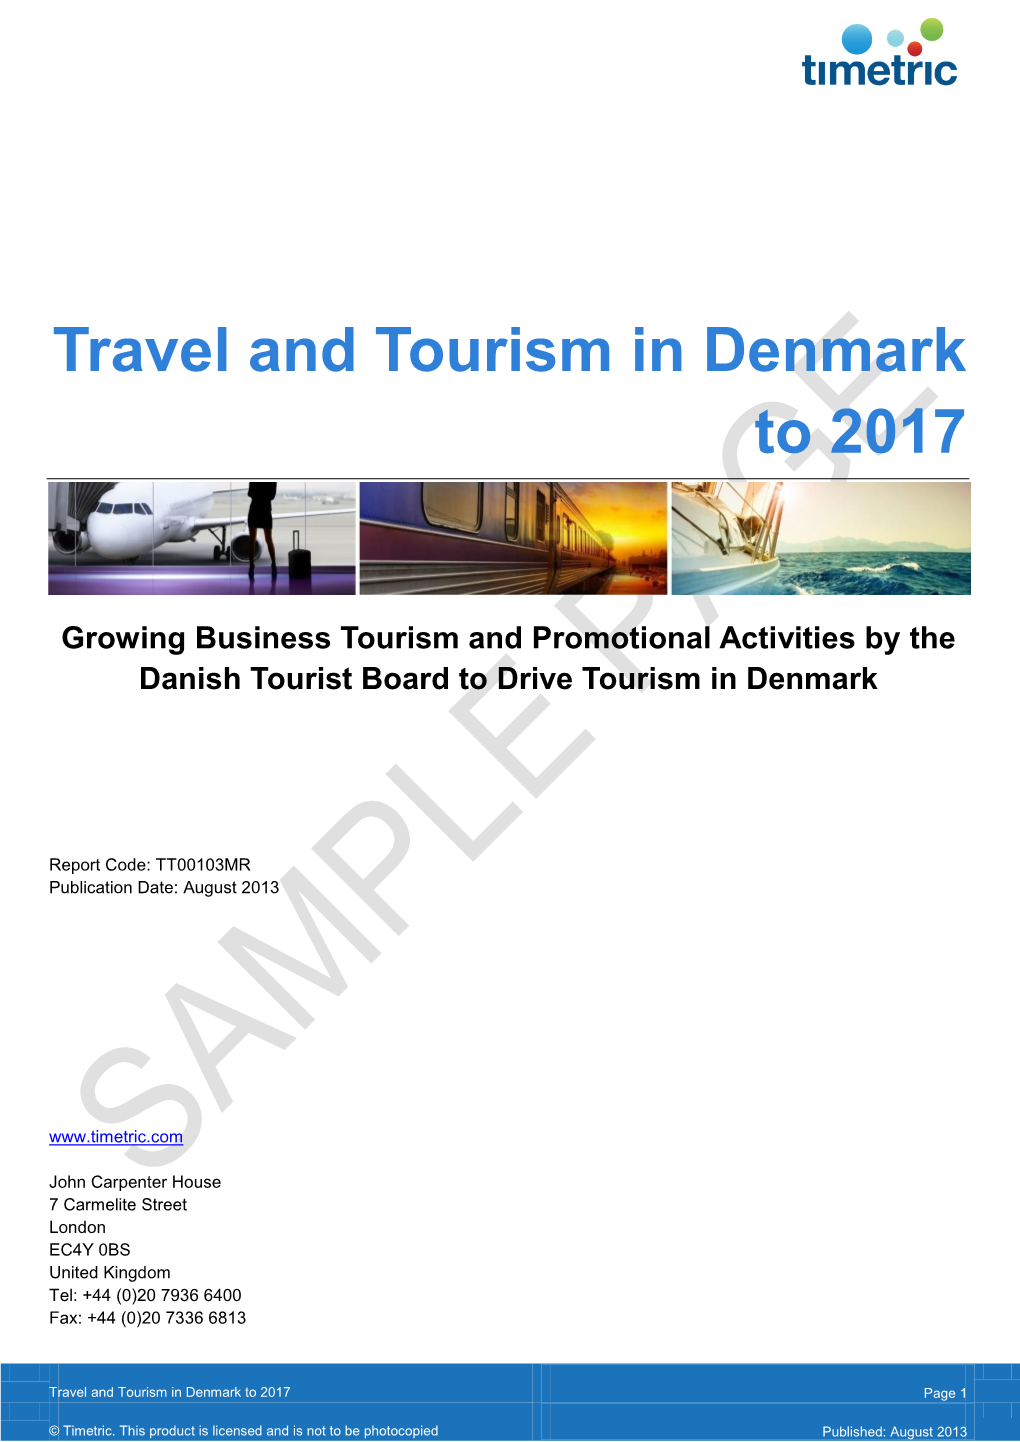 Travel and Tourism in Denmark to 2017